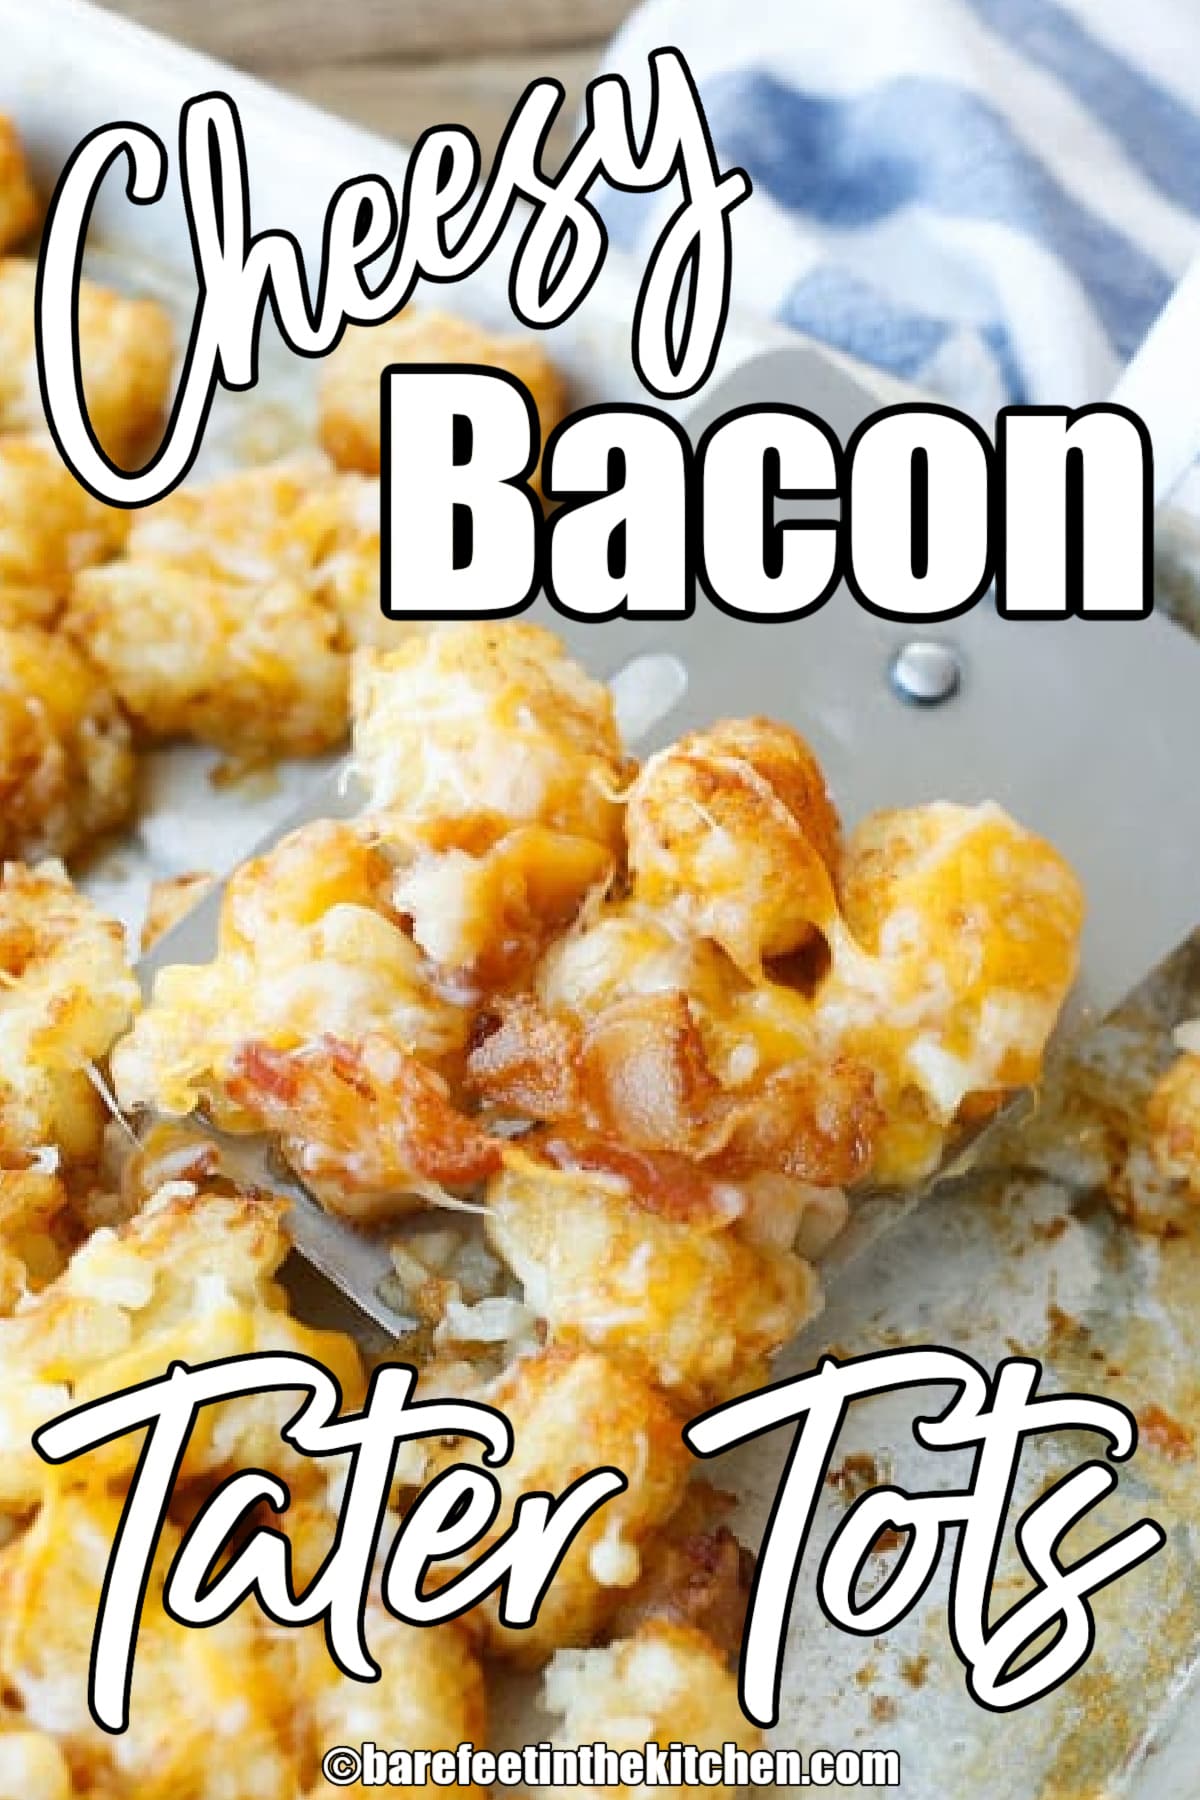 Cheesy Bacon Tater Tots - Barefeet in the Kitchen